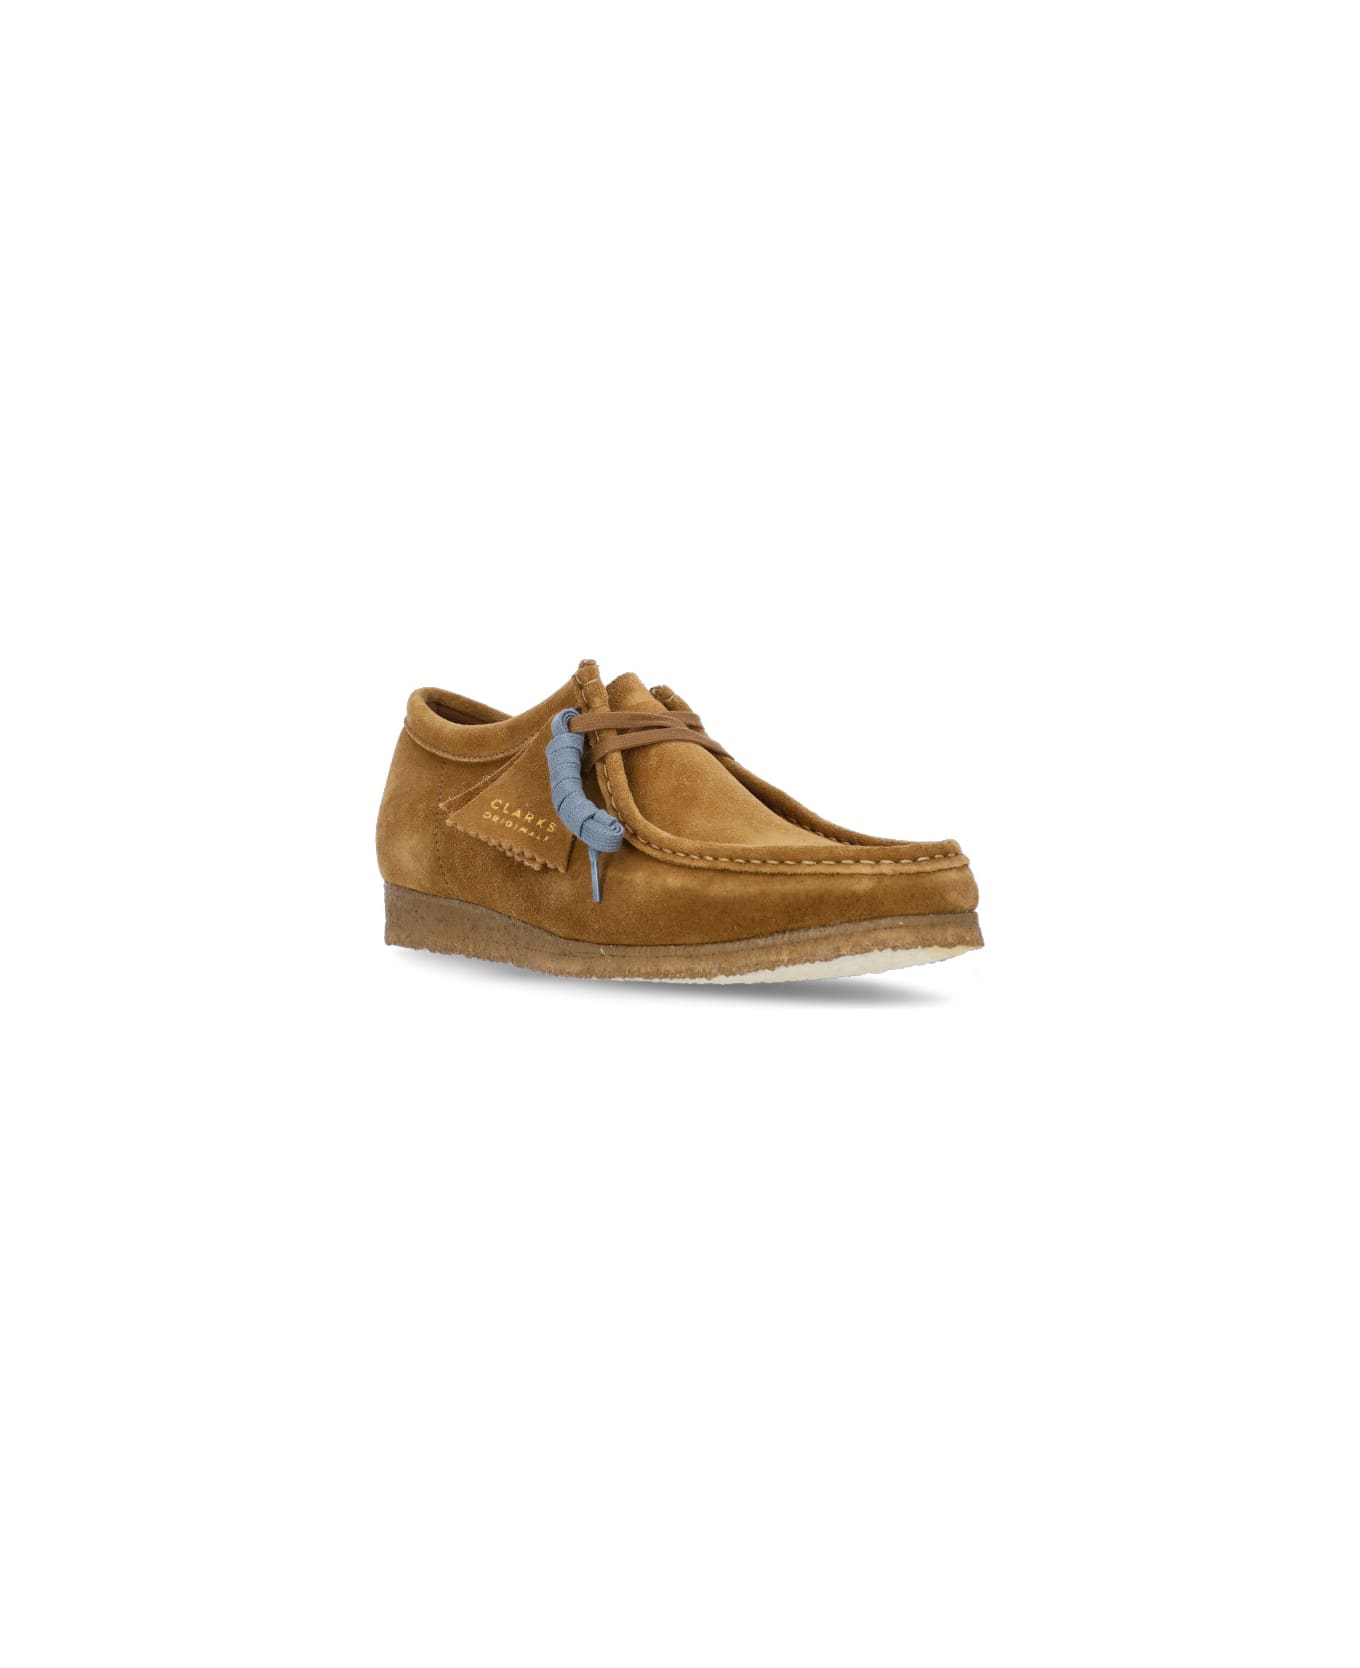 Clarks Wallabee Loafers Clarks - BROWN